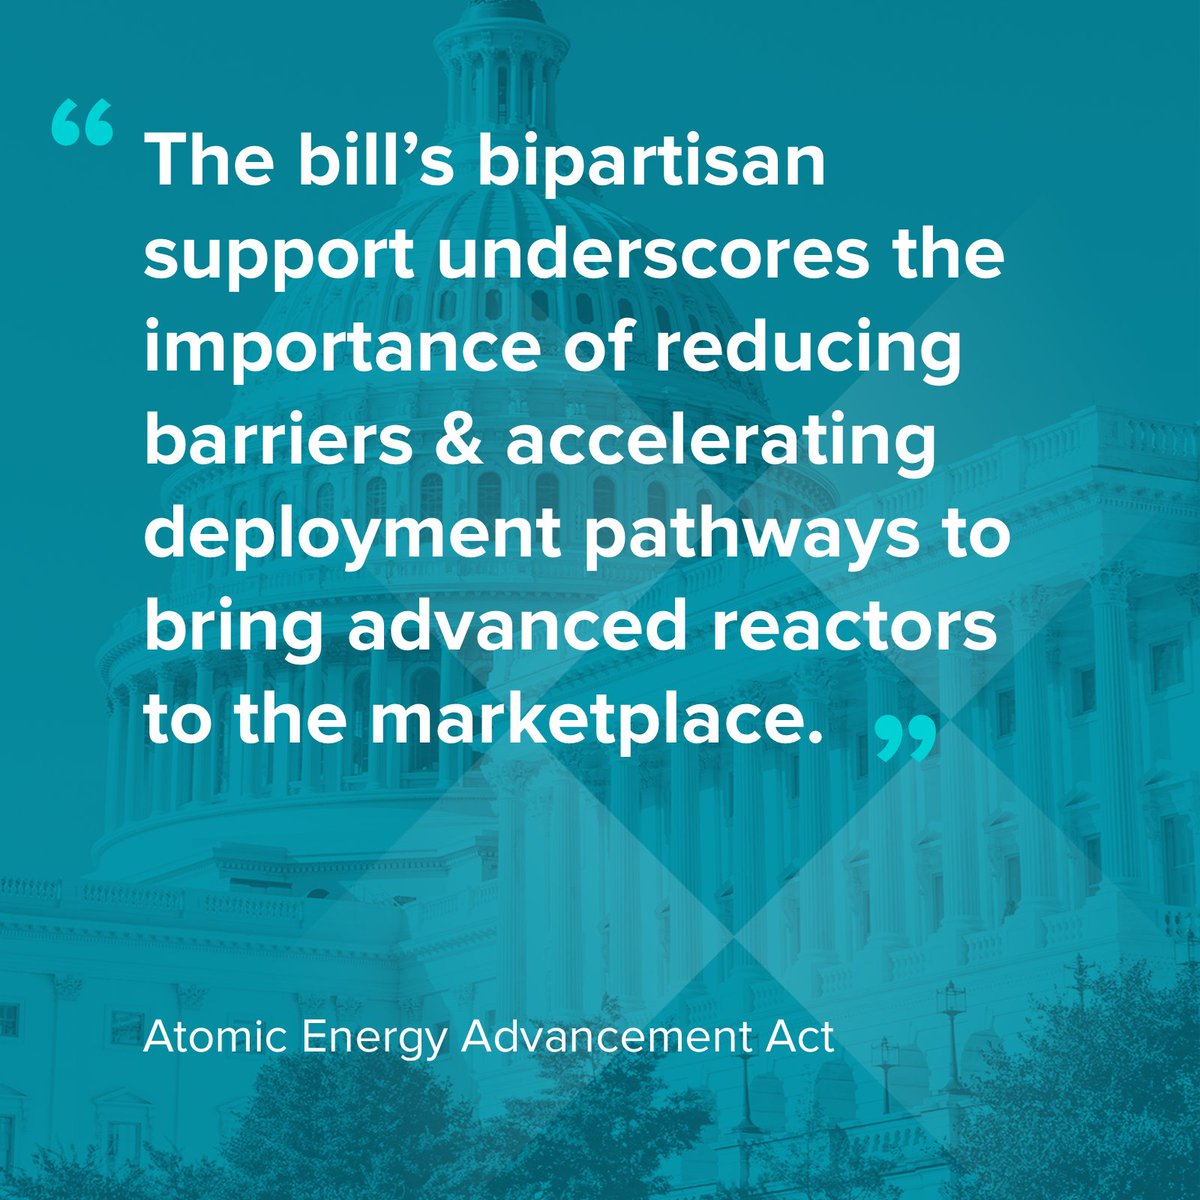 X-energy applauds the passage of the Atomic Energy Advancement Act in the U.S. House of Representatives, emphasizing the critical role advanced nuclear technologies will play to meet global energy demands. The bill’s bipartisan support underscores the importance of reducing…